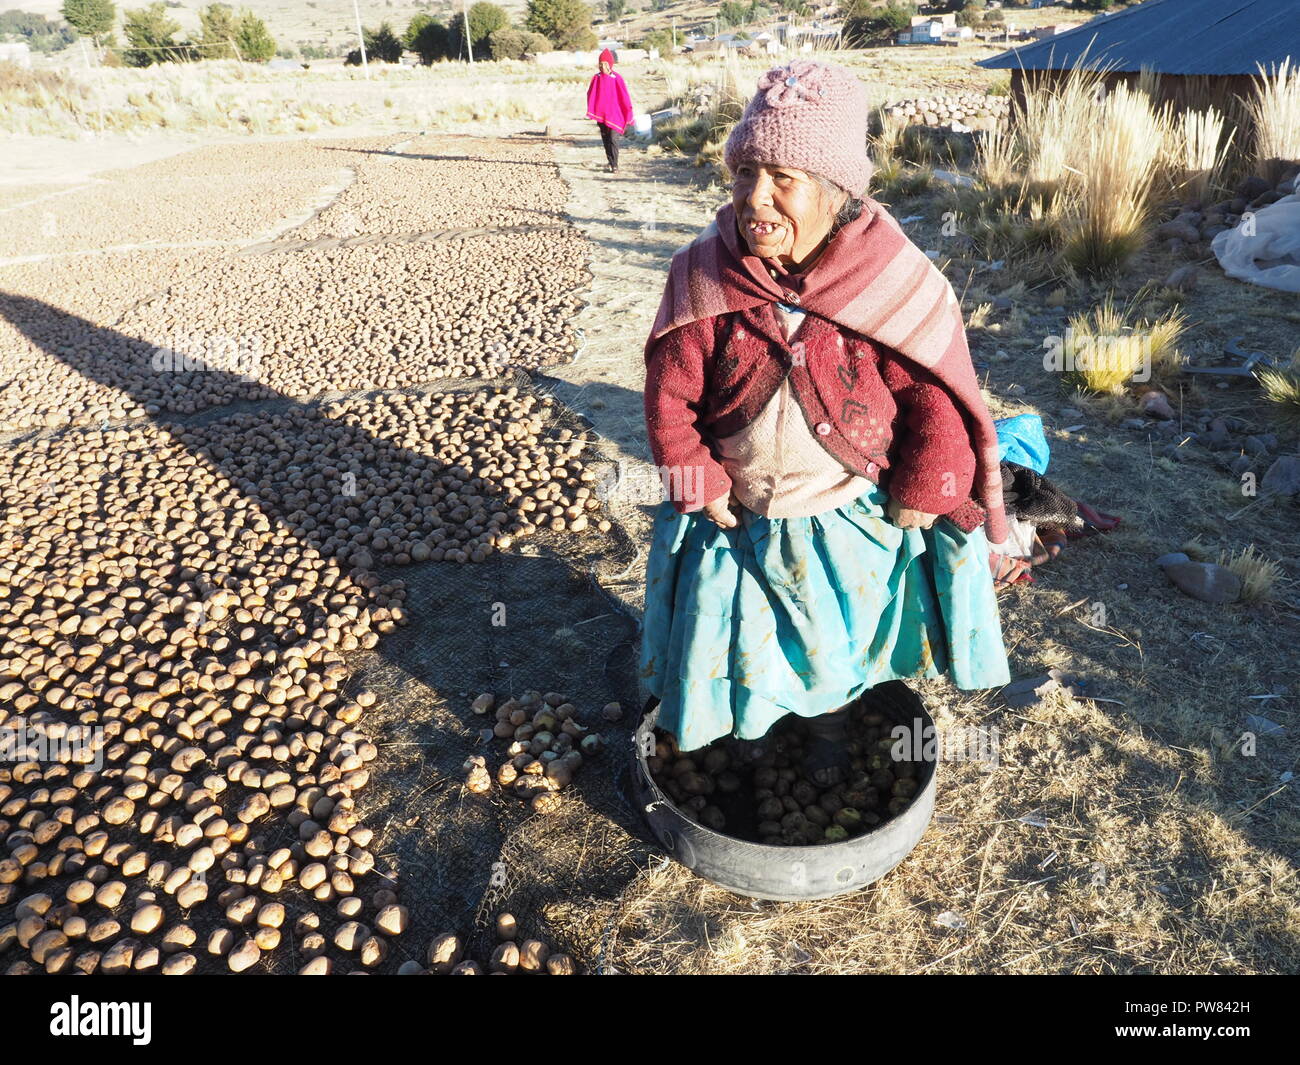 In PERU a variety of potato called Chuño, produced by dehydration through a cycle of exposure to sun and frost and crushing. Stock Photo